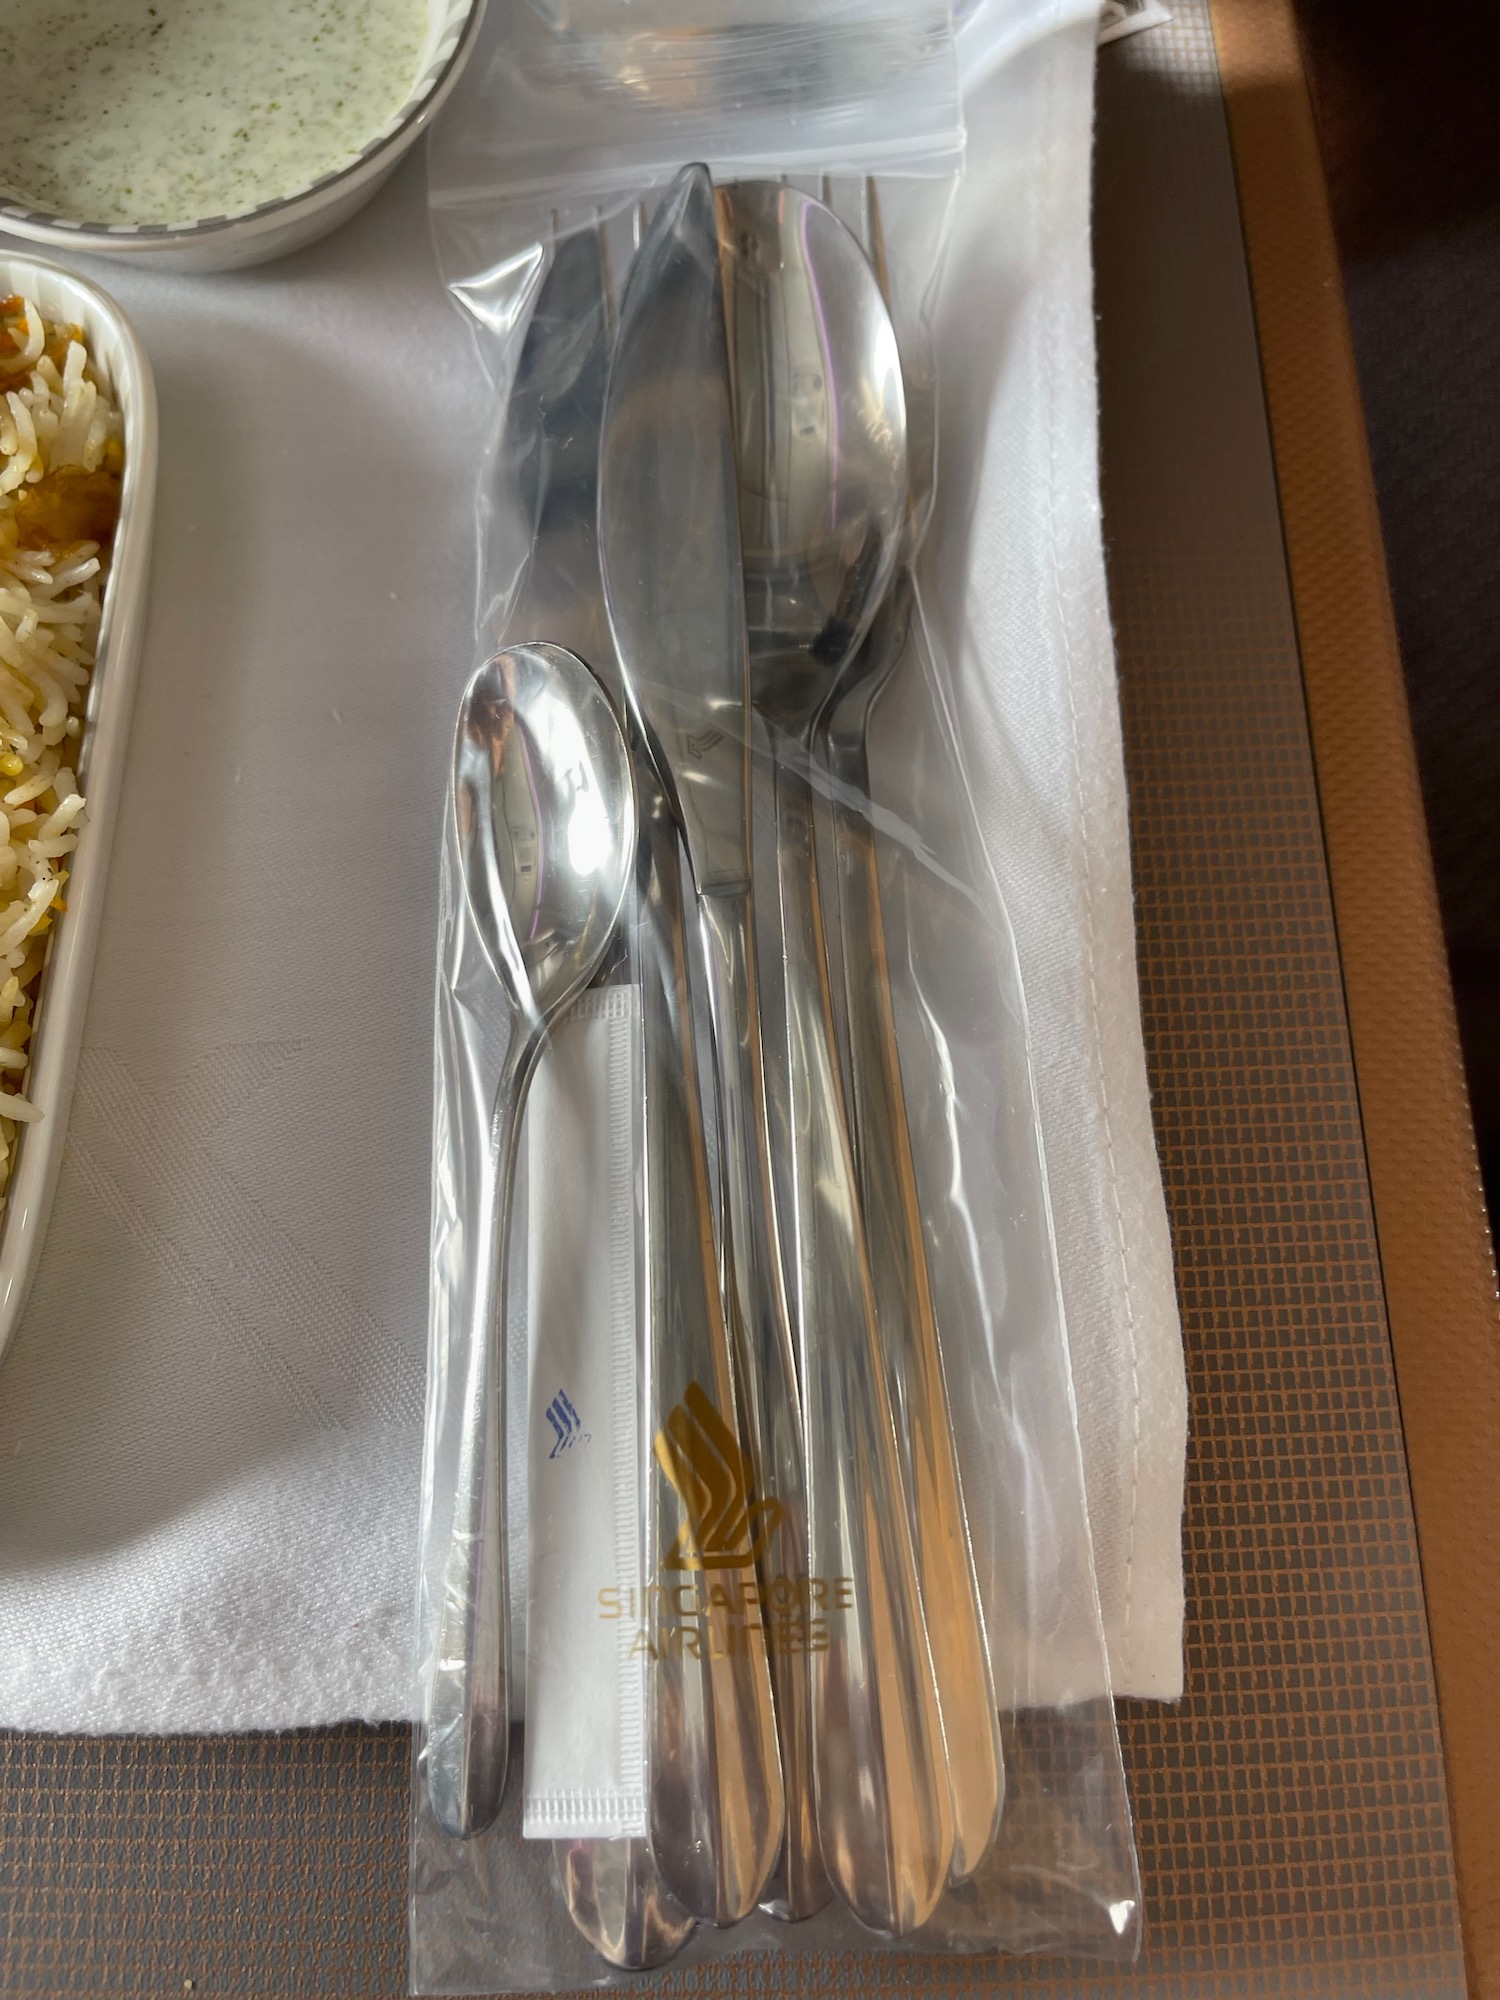 a spoons and forks in a plastic bag